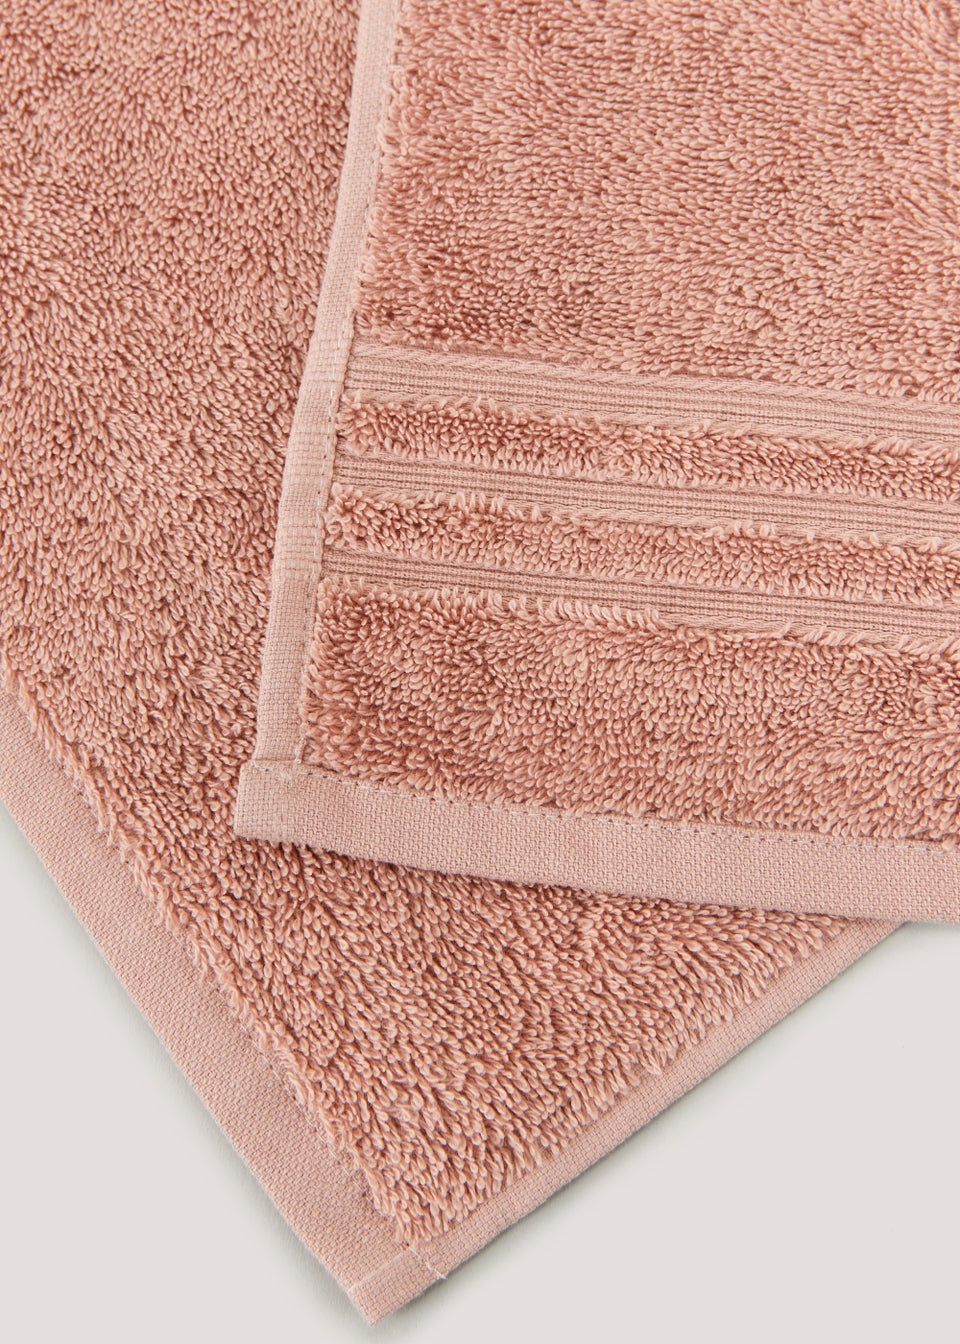 Dusky Pink 100% Egyptian Cotton Towels